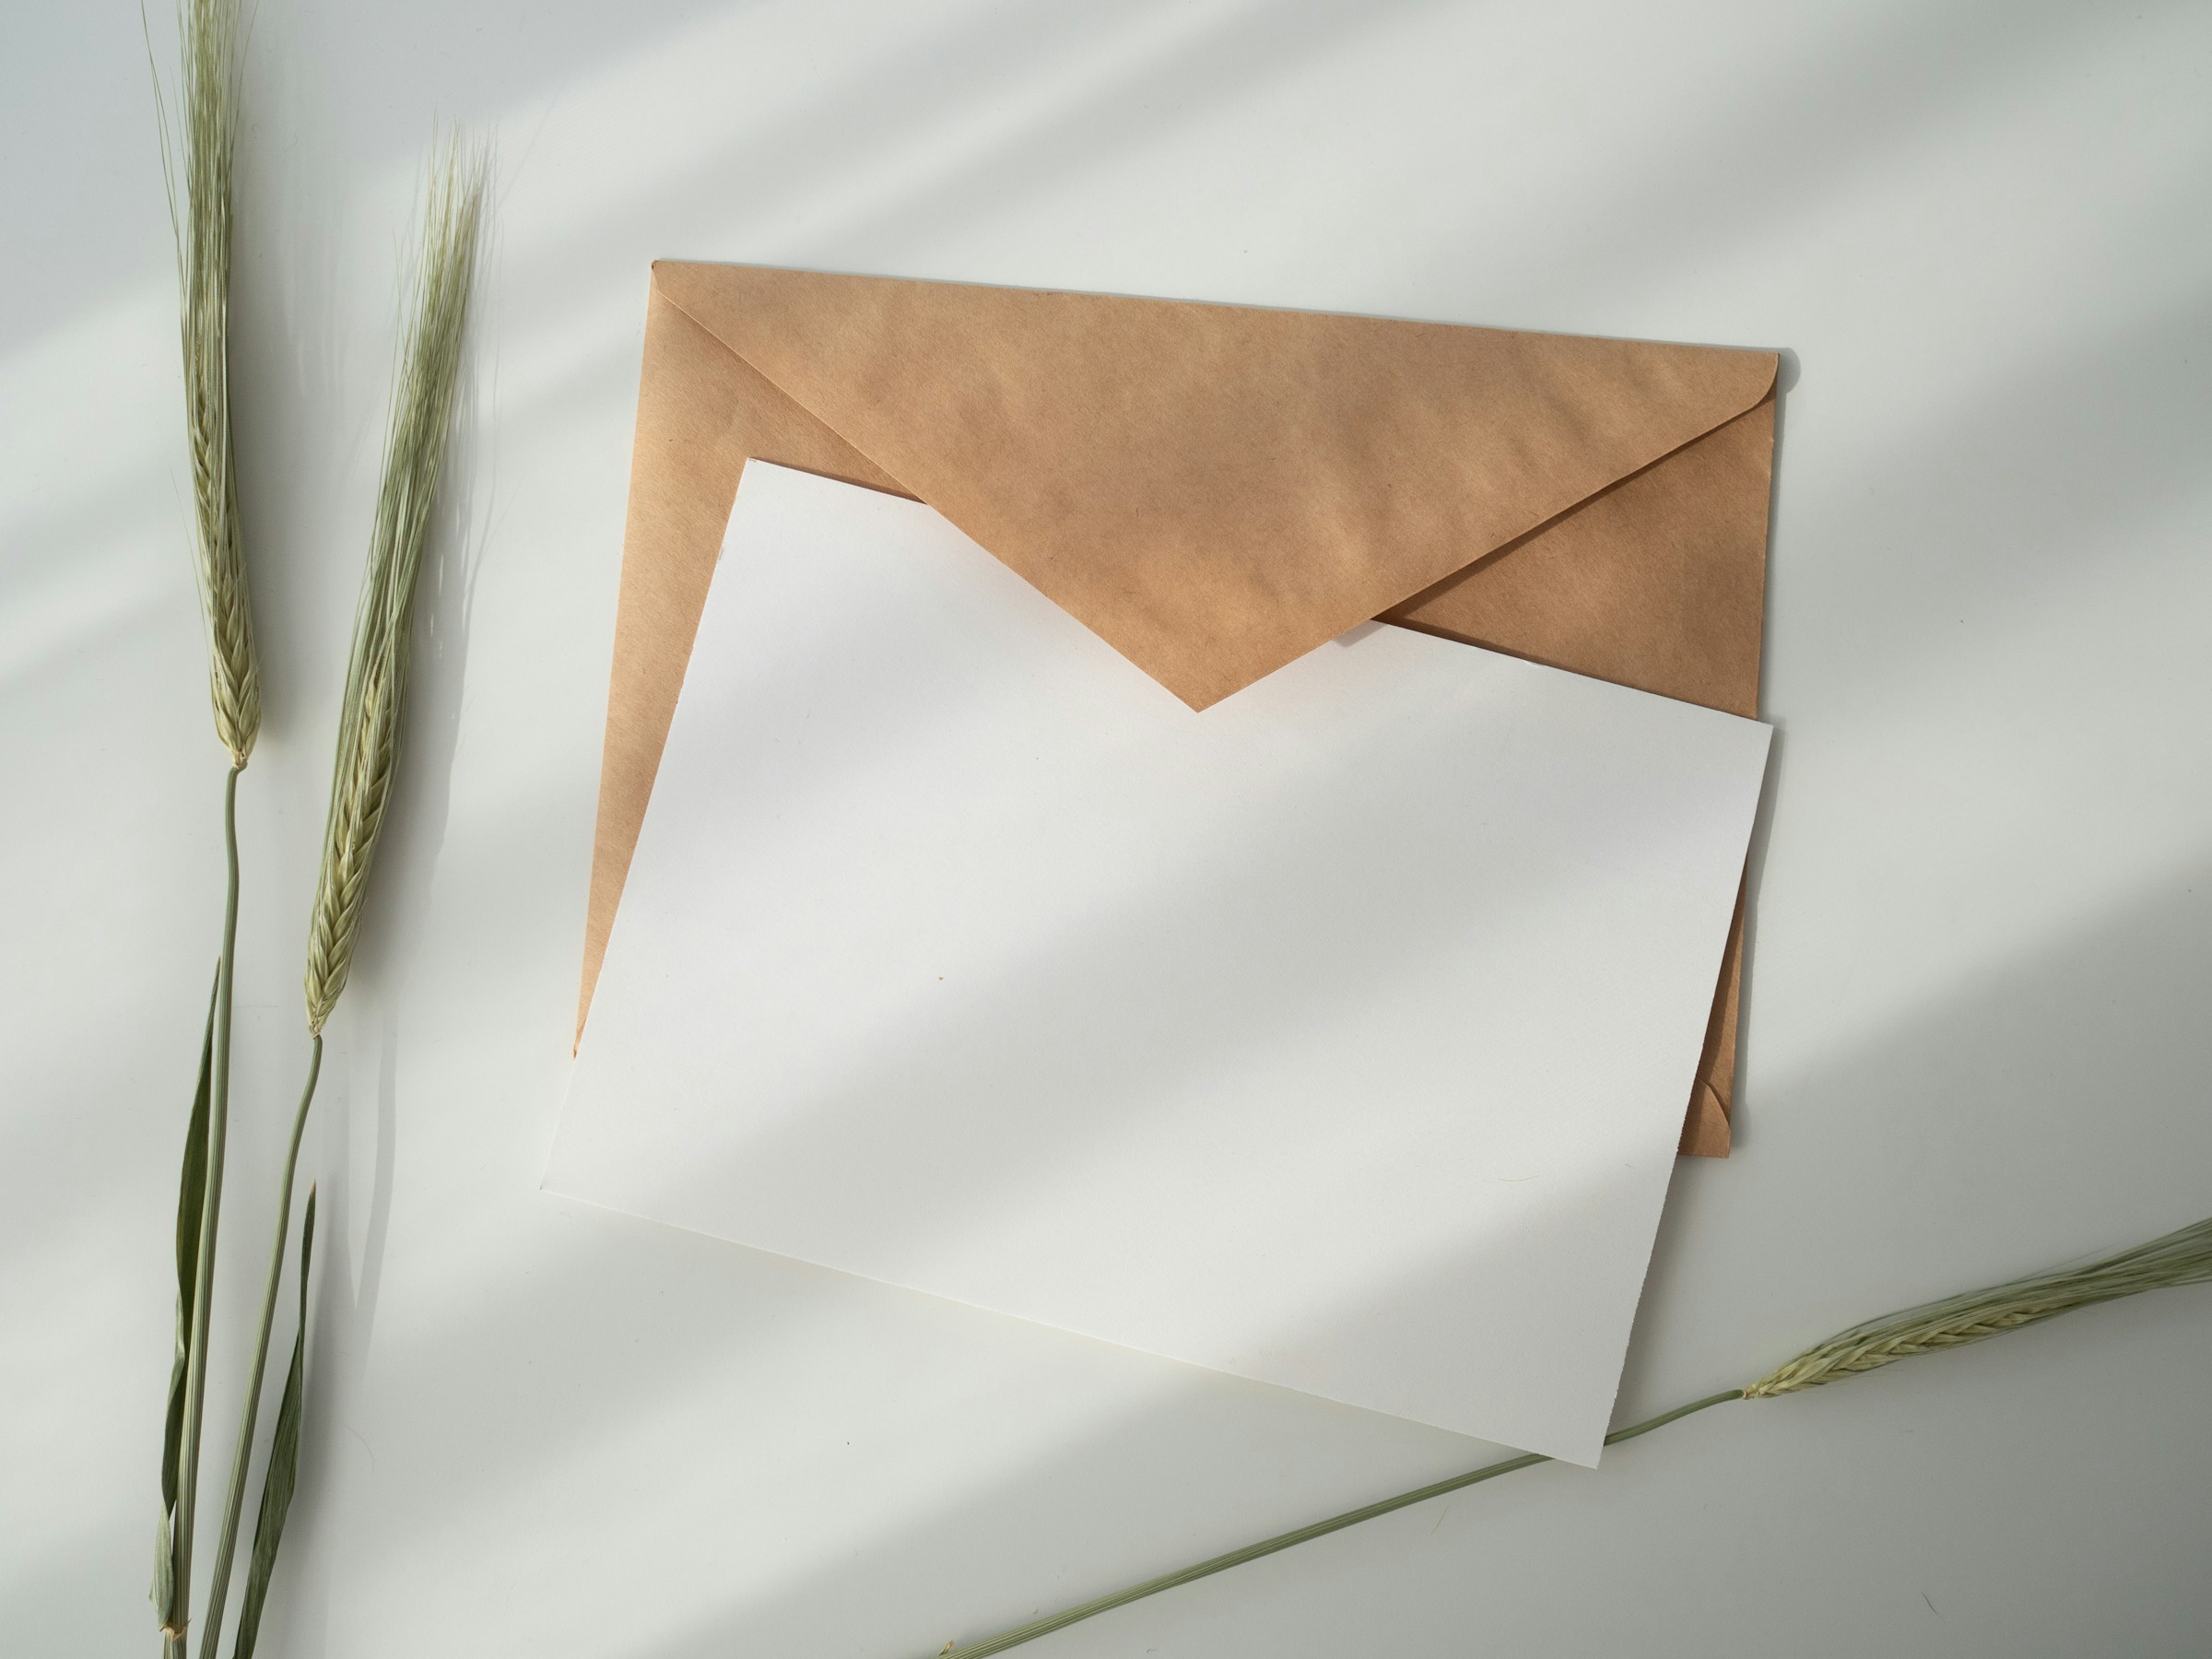 Brown envelope with white paper | Source: Unsplash